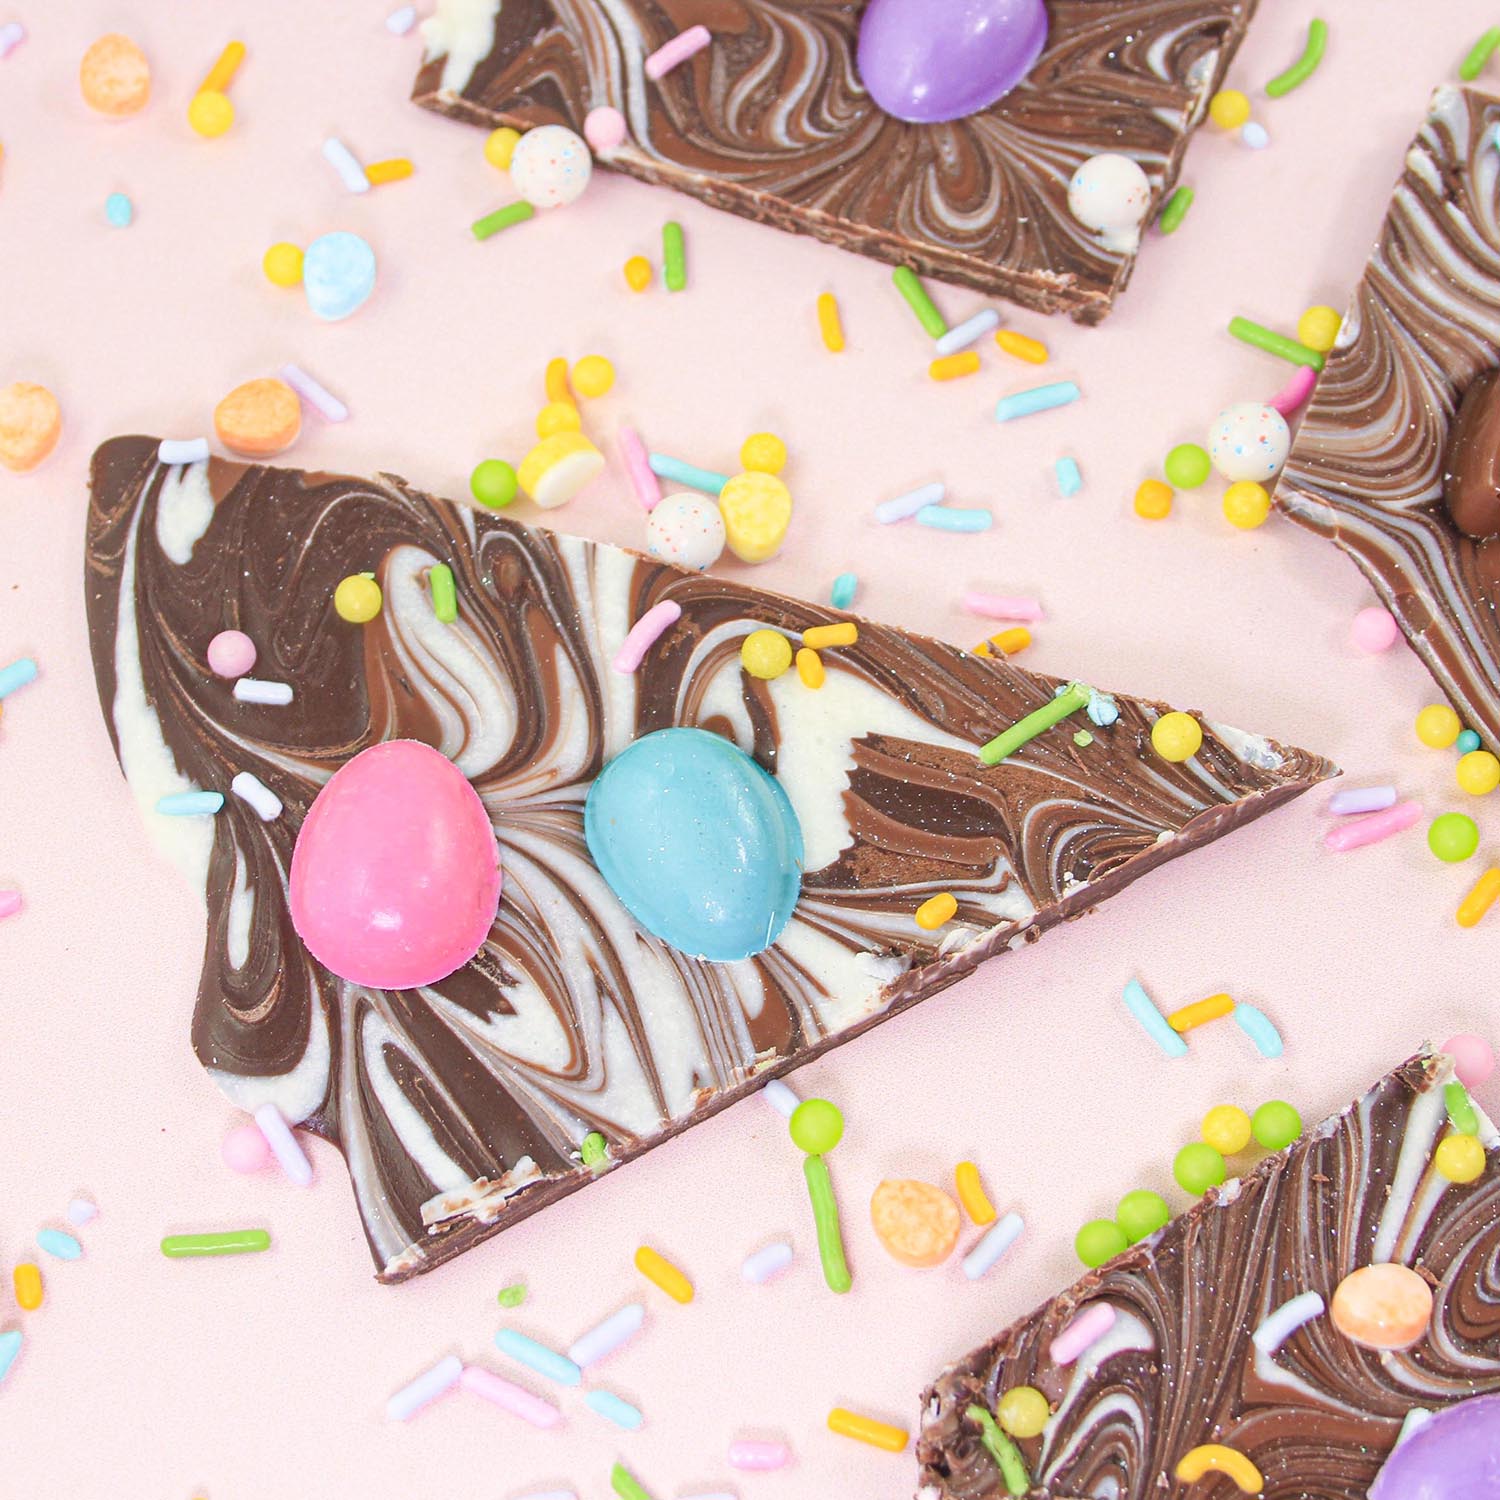 Finished Piece of Easter Bunny Chocolate Bark showing dark, milk and white chocolate swirls and pieces adorned with chocolate molded bunnies, colored chocolate jelly bean eggs and a sprintime colored sprinkle mix that glitters